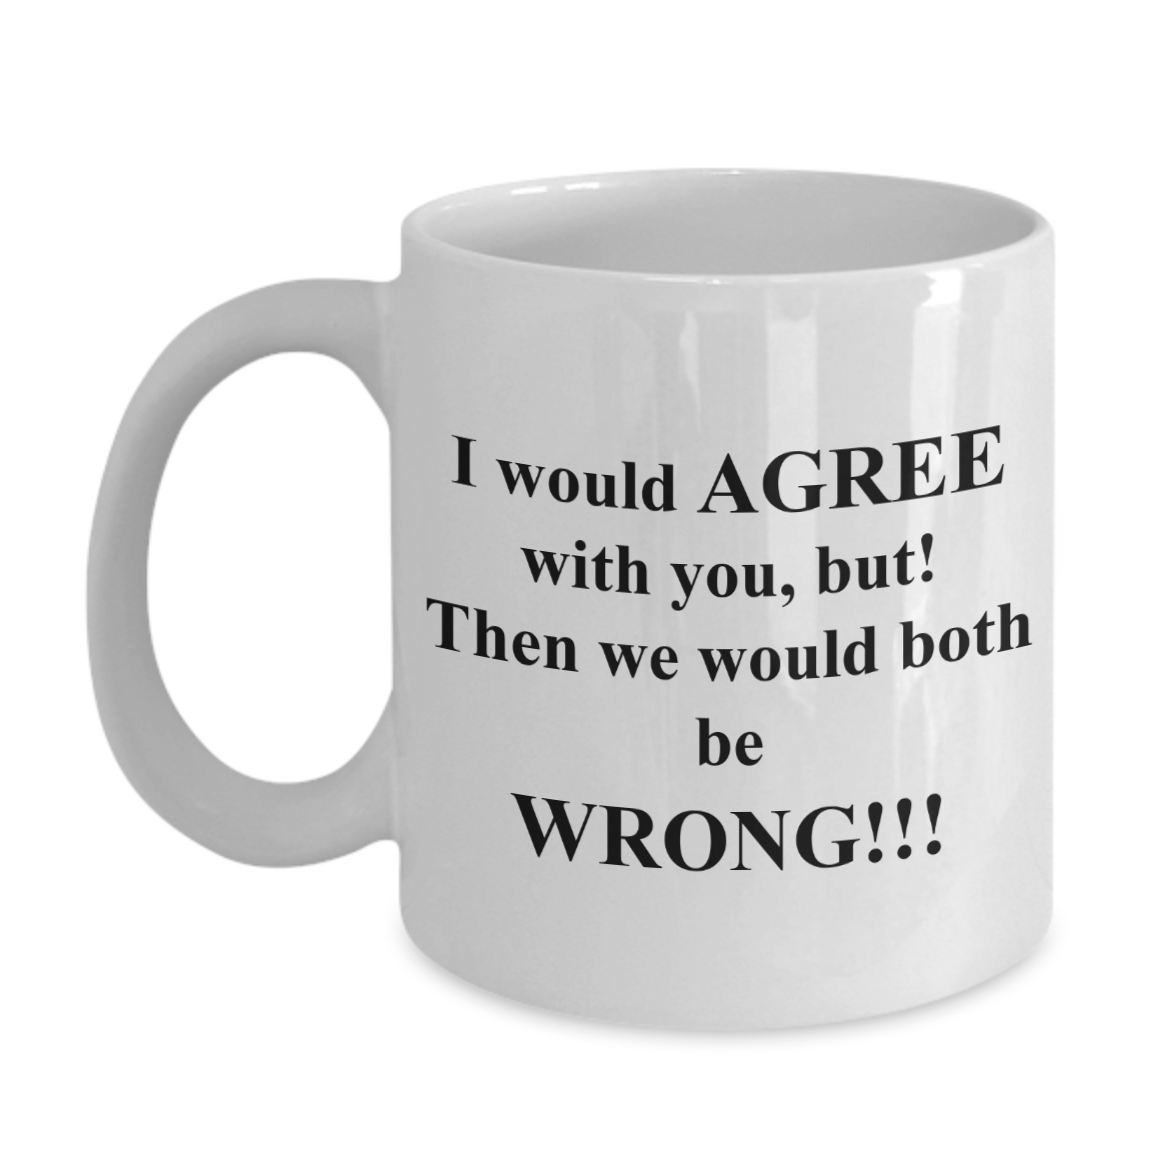 I Would Agree BUT!  - Funny Quotes Coffee Mug